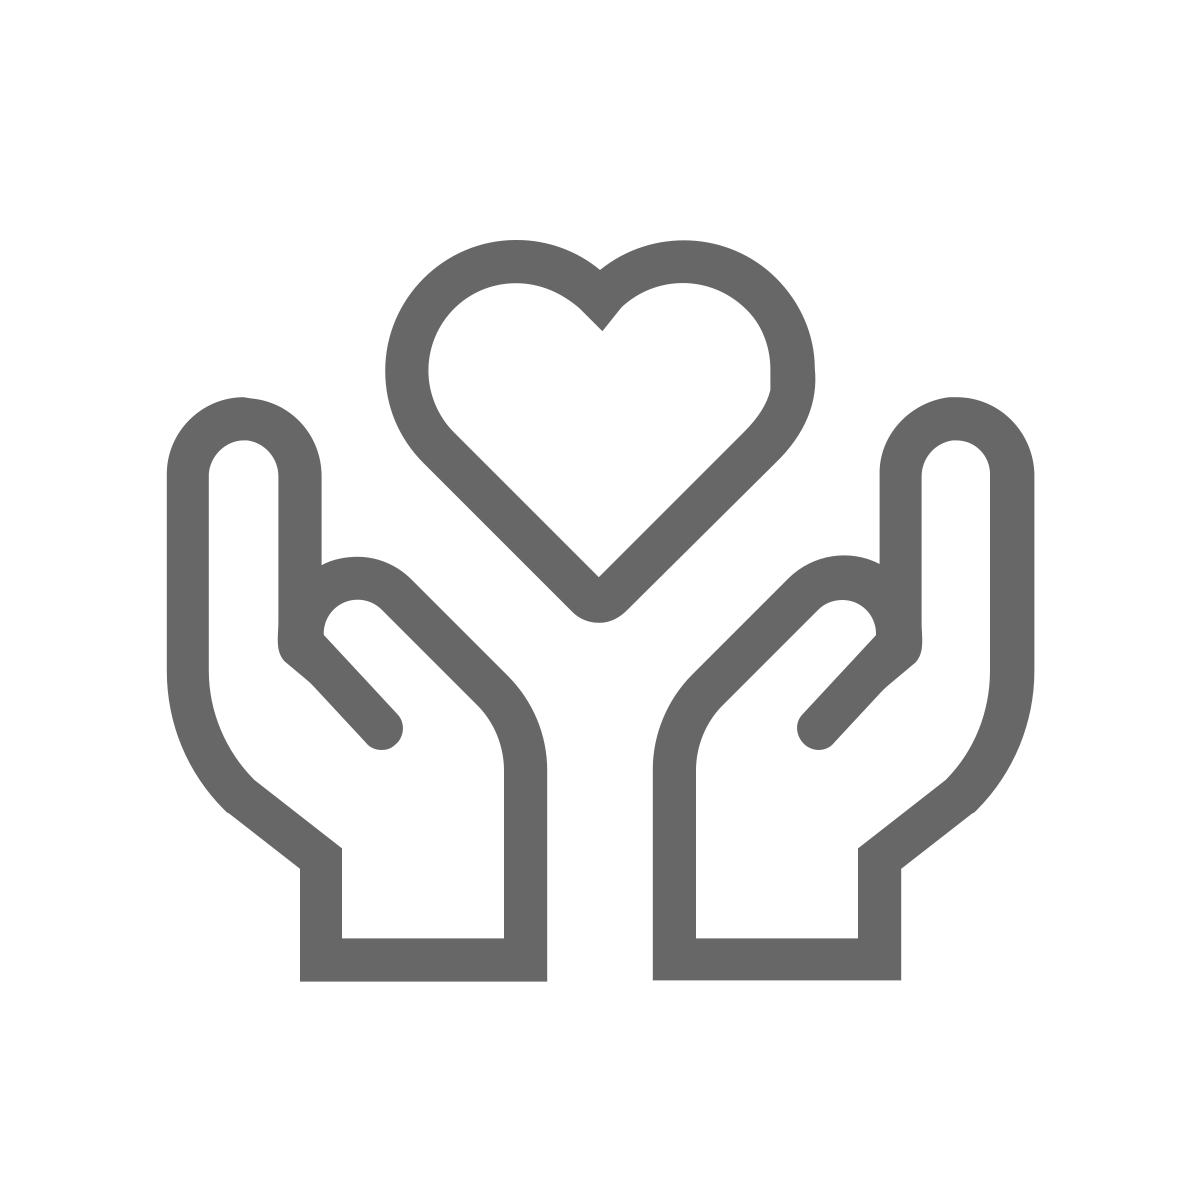 Icon: Two hands holding up a heart